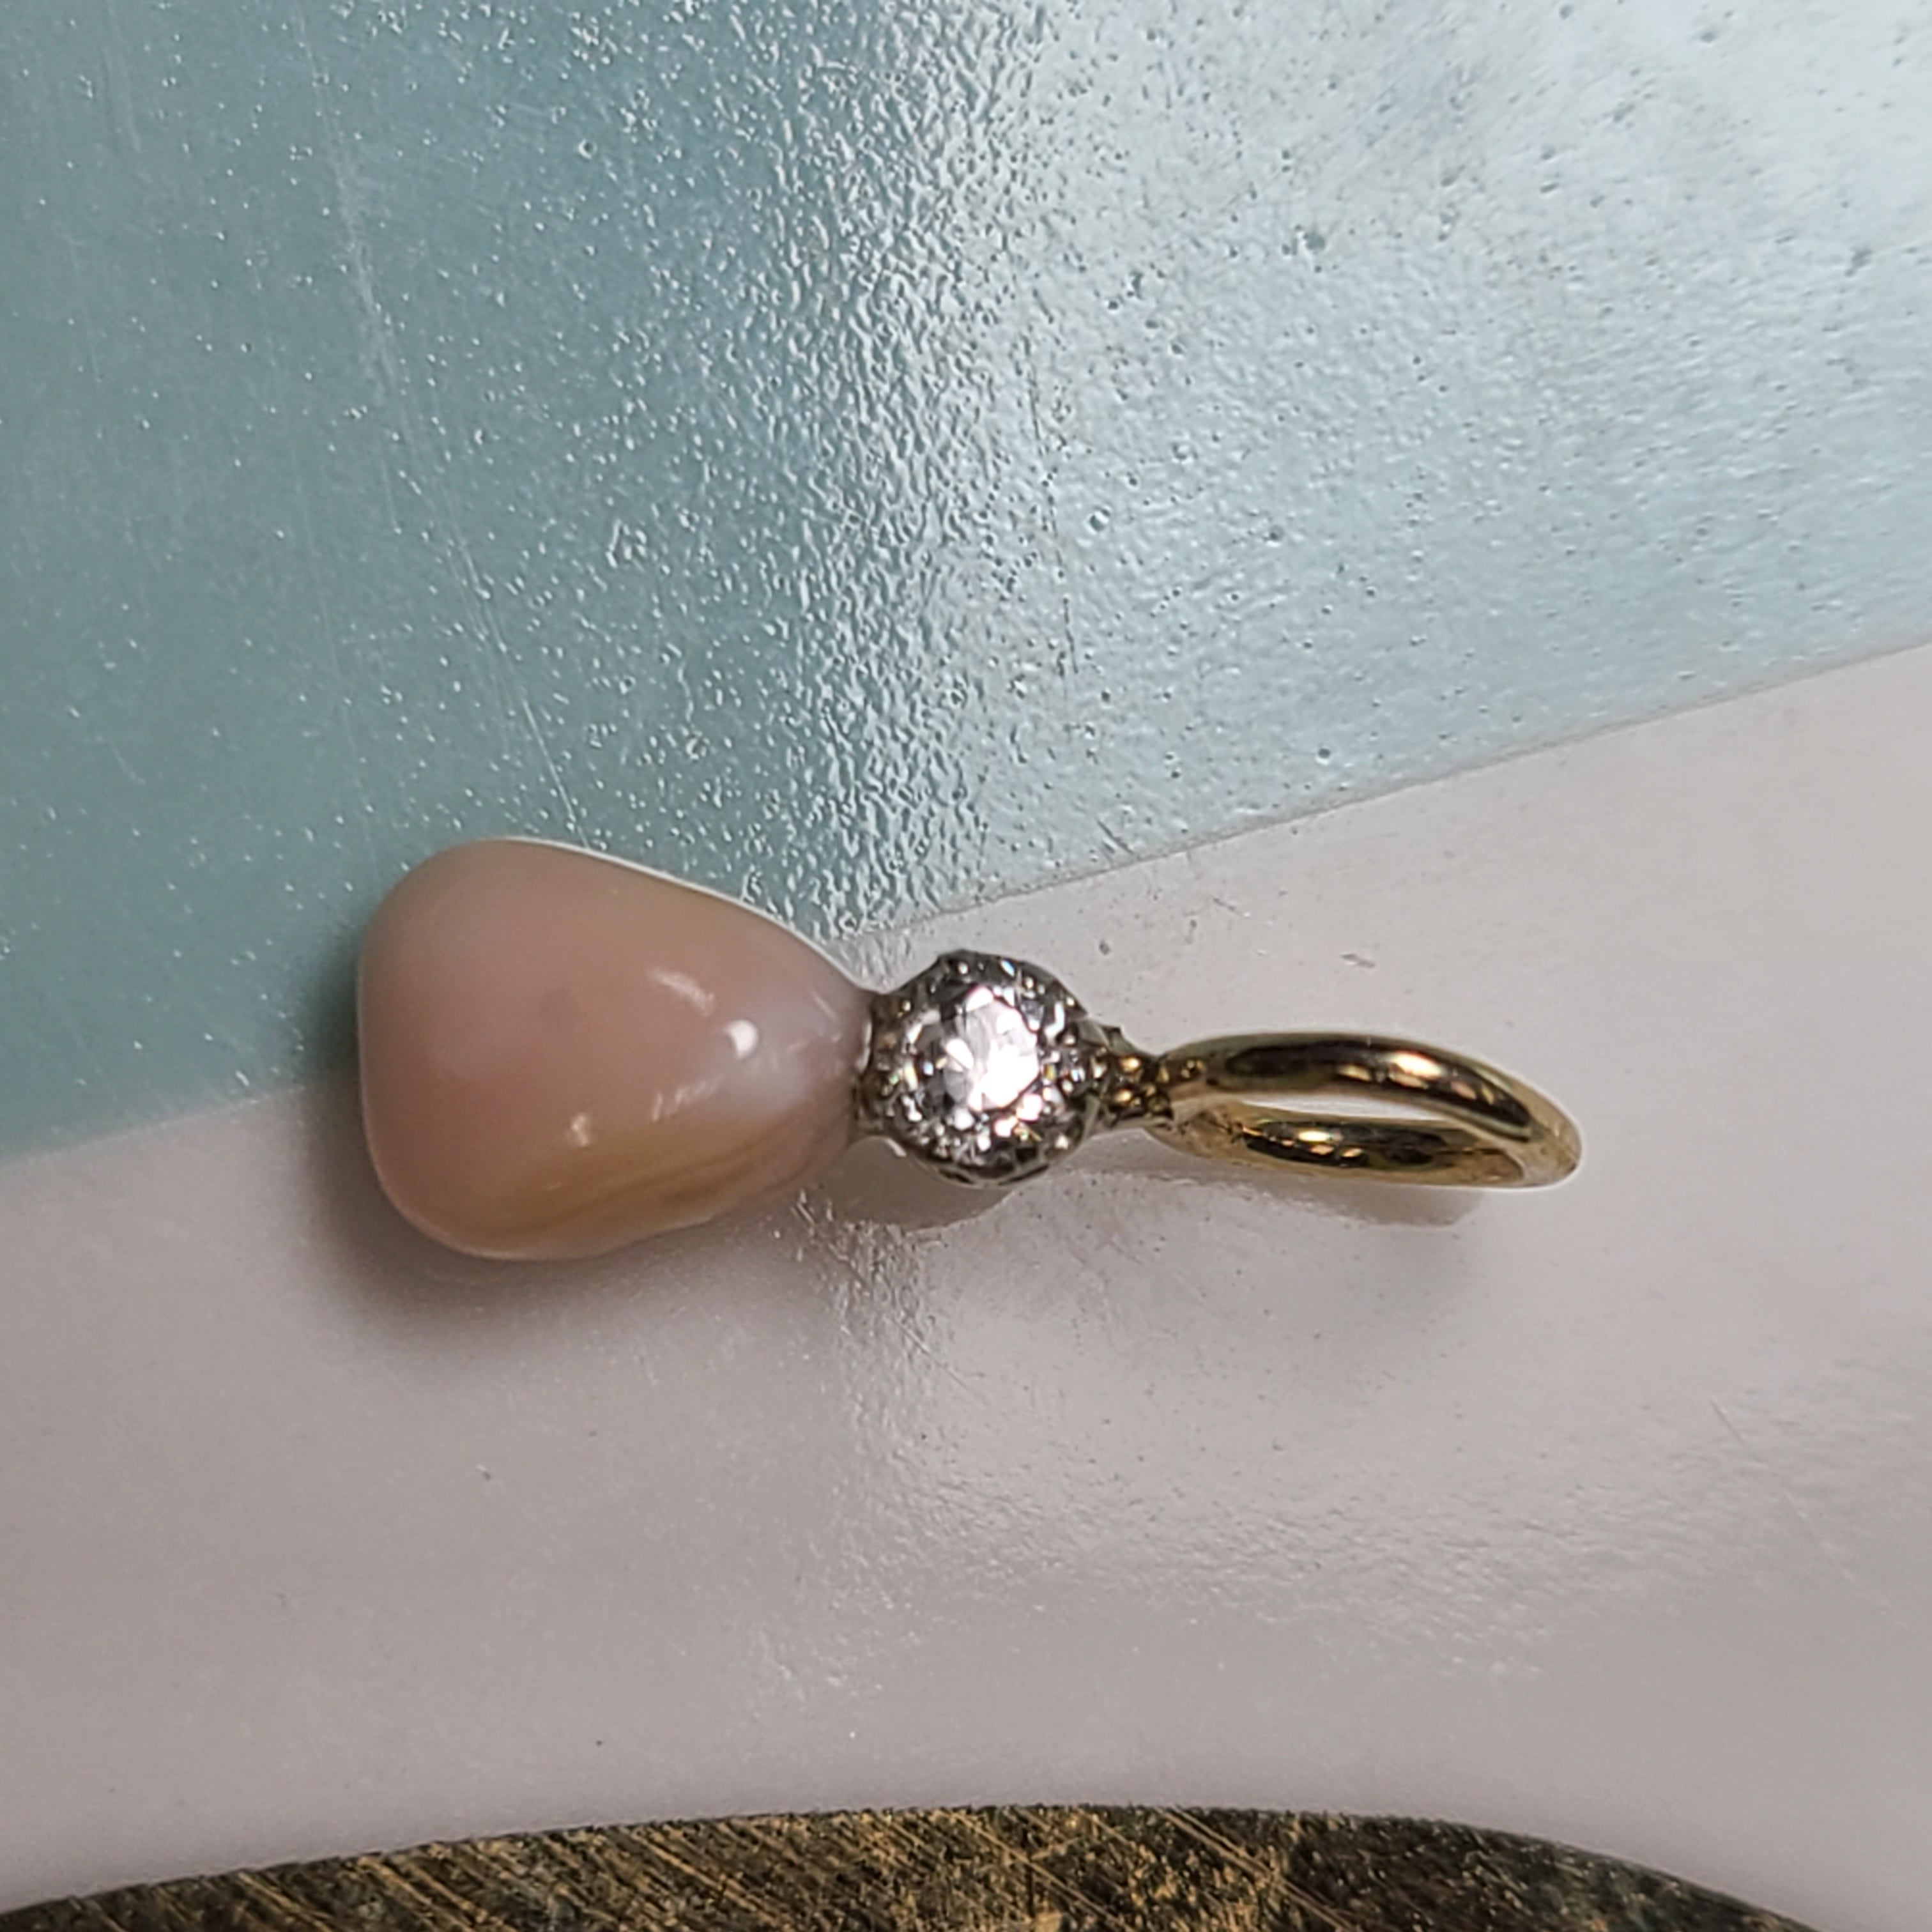 14K Yellow Gold Conch Pearl With Old Mine Cut Diamond Pendant Charm